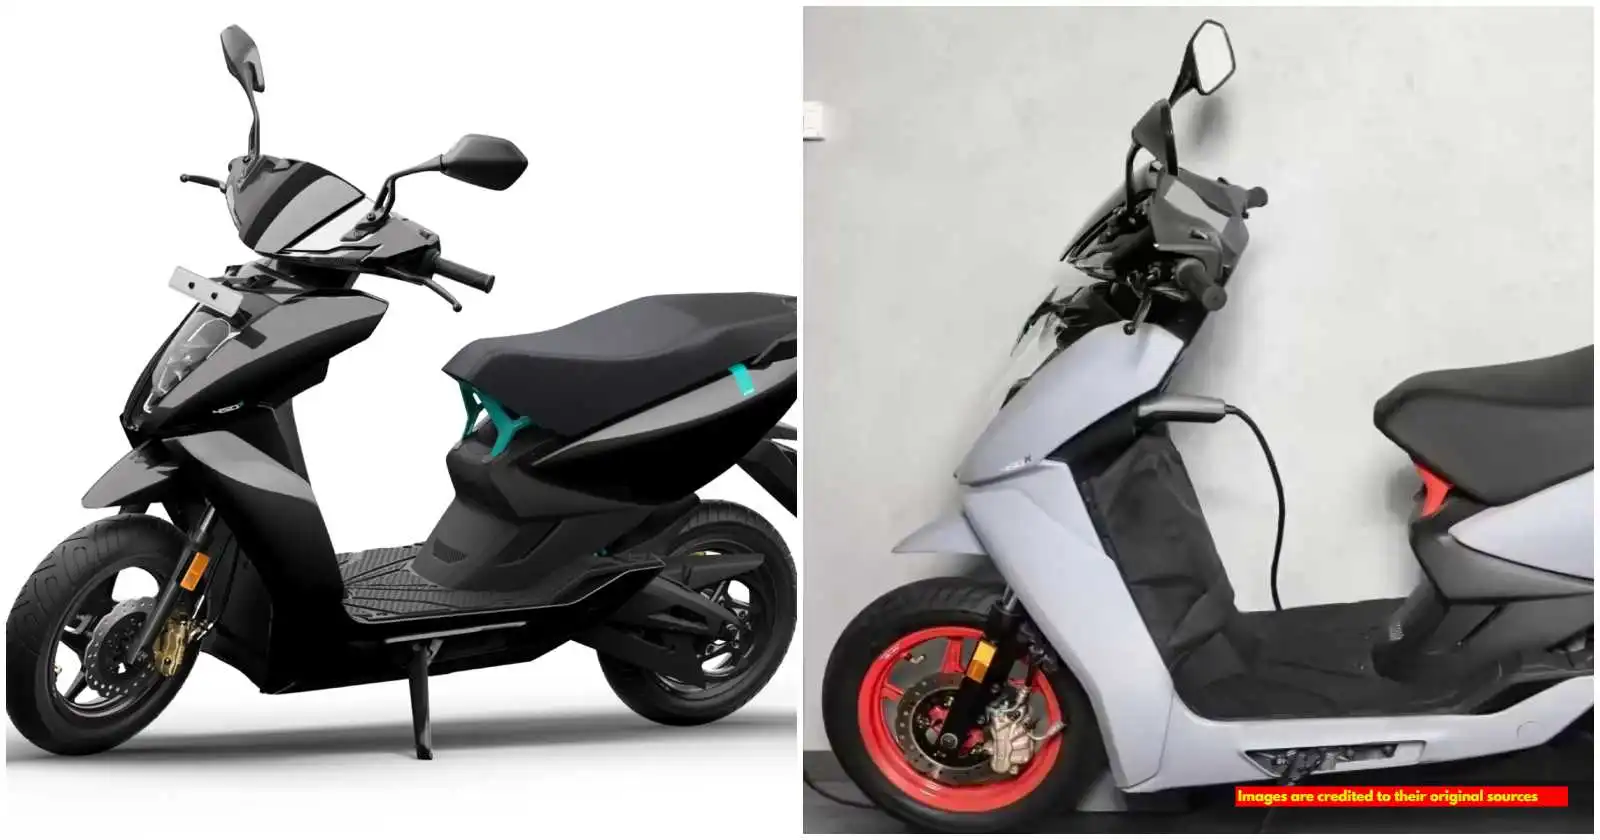 Buy Ather 450S at offer price: The Ather 450S electric scooter offers impressive pricing, range, and efficient battery charging capabilities